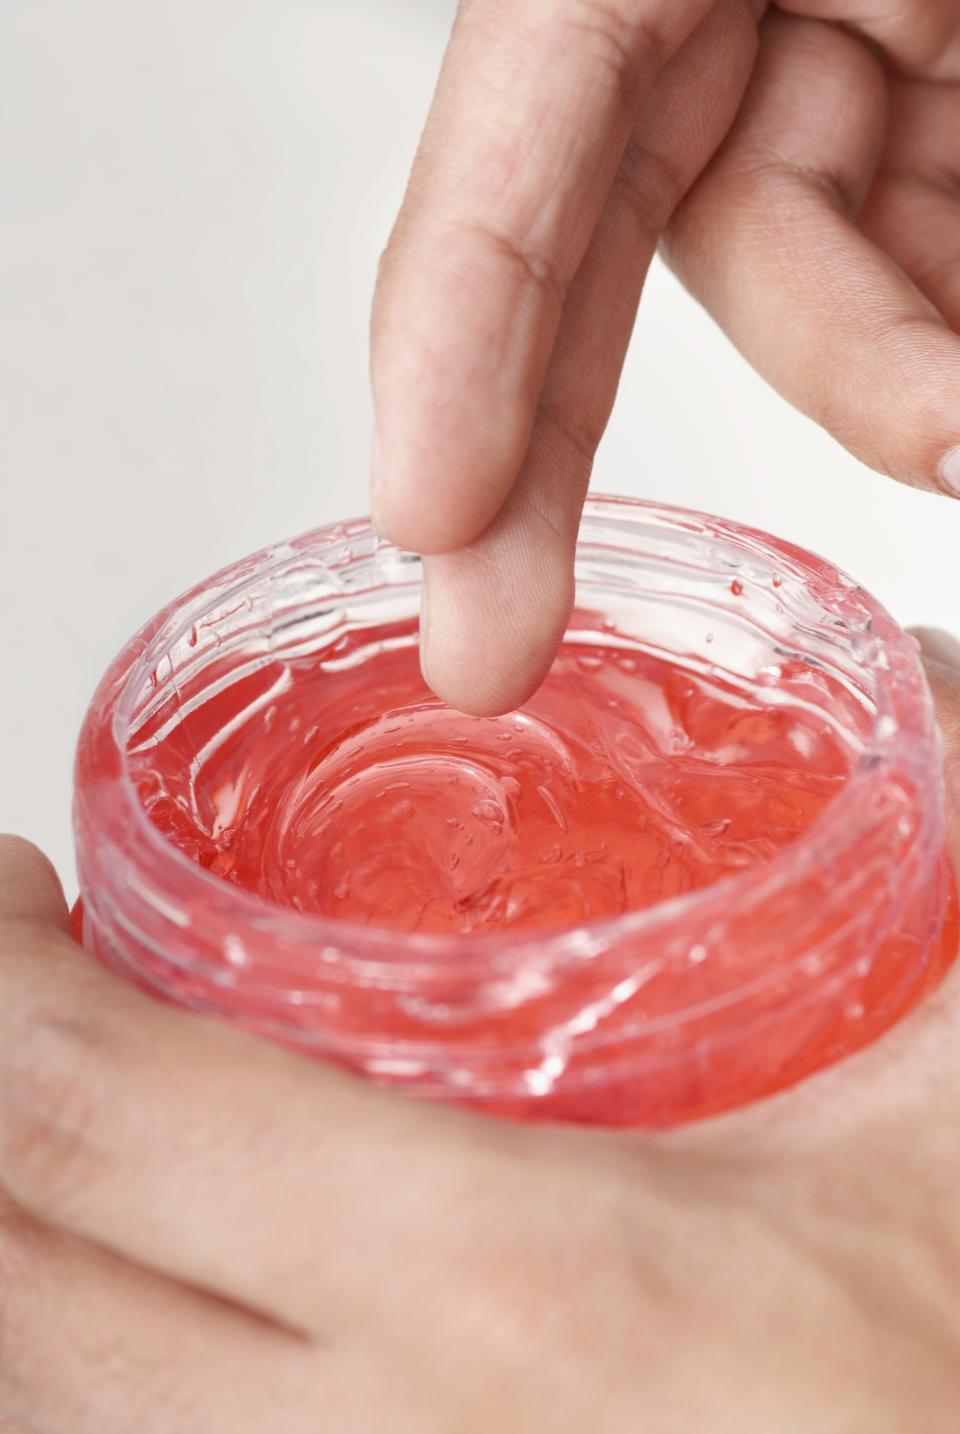 Try some petroleum jelly or hair gel.